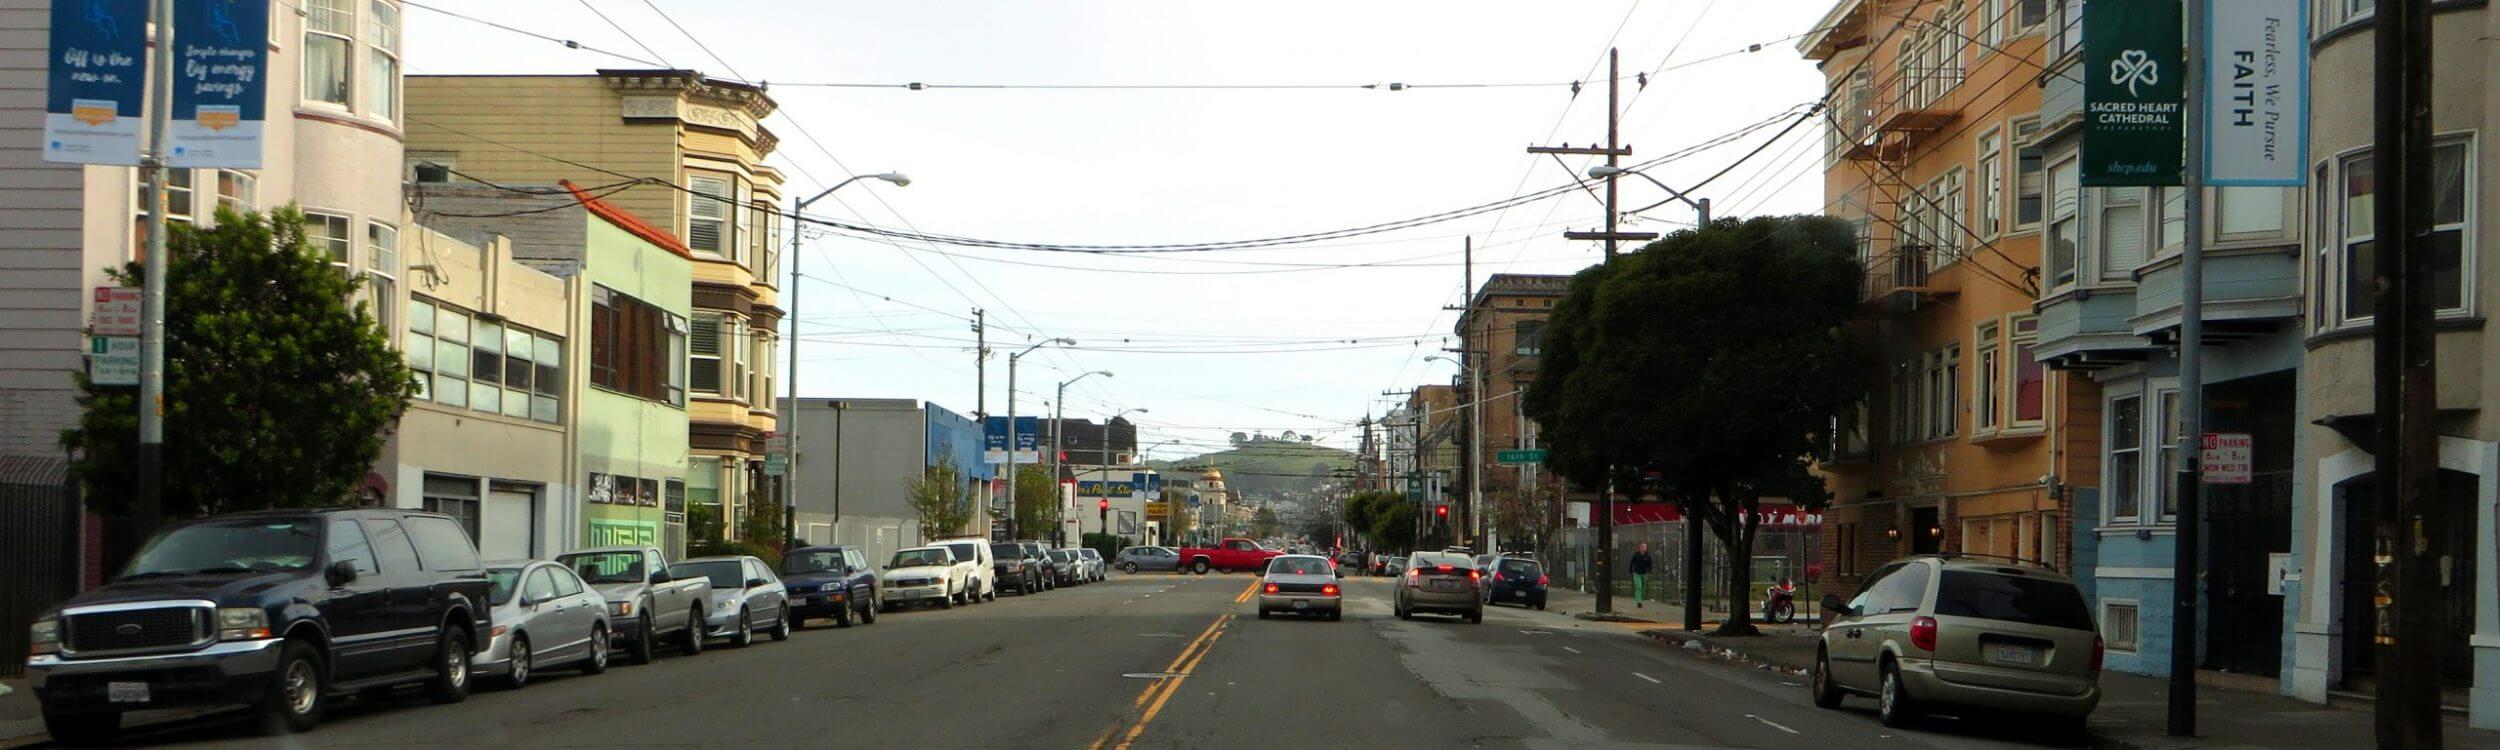 Let’s walk South Van Ness together to identify safety issues